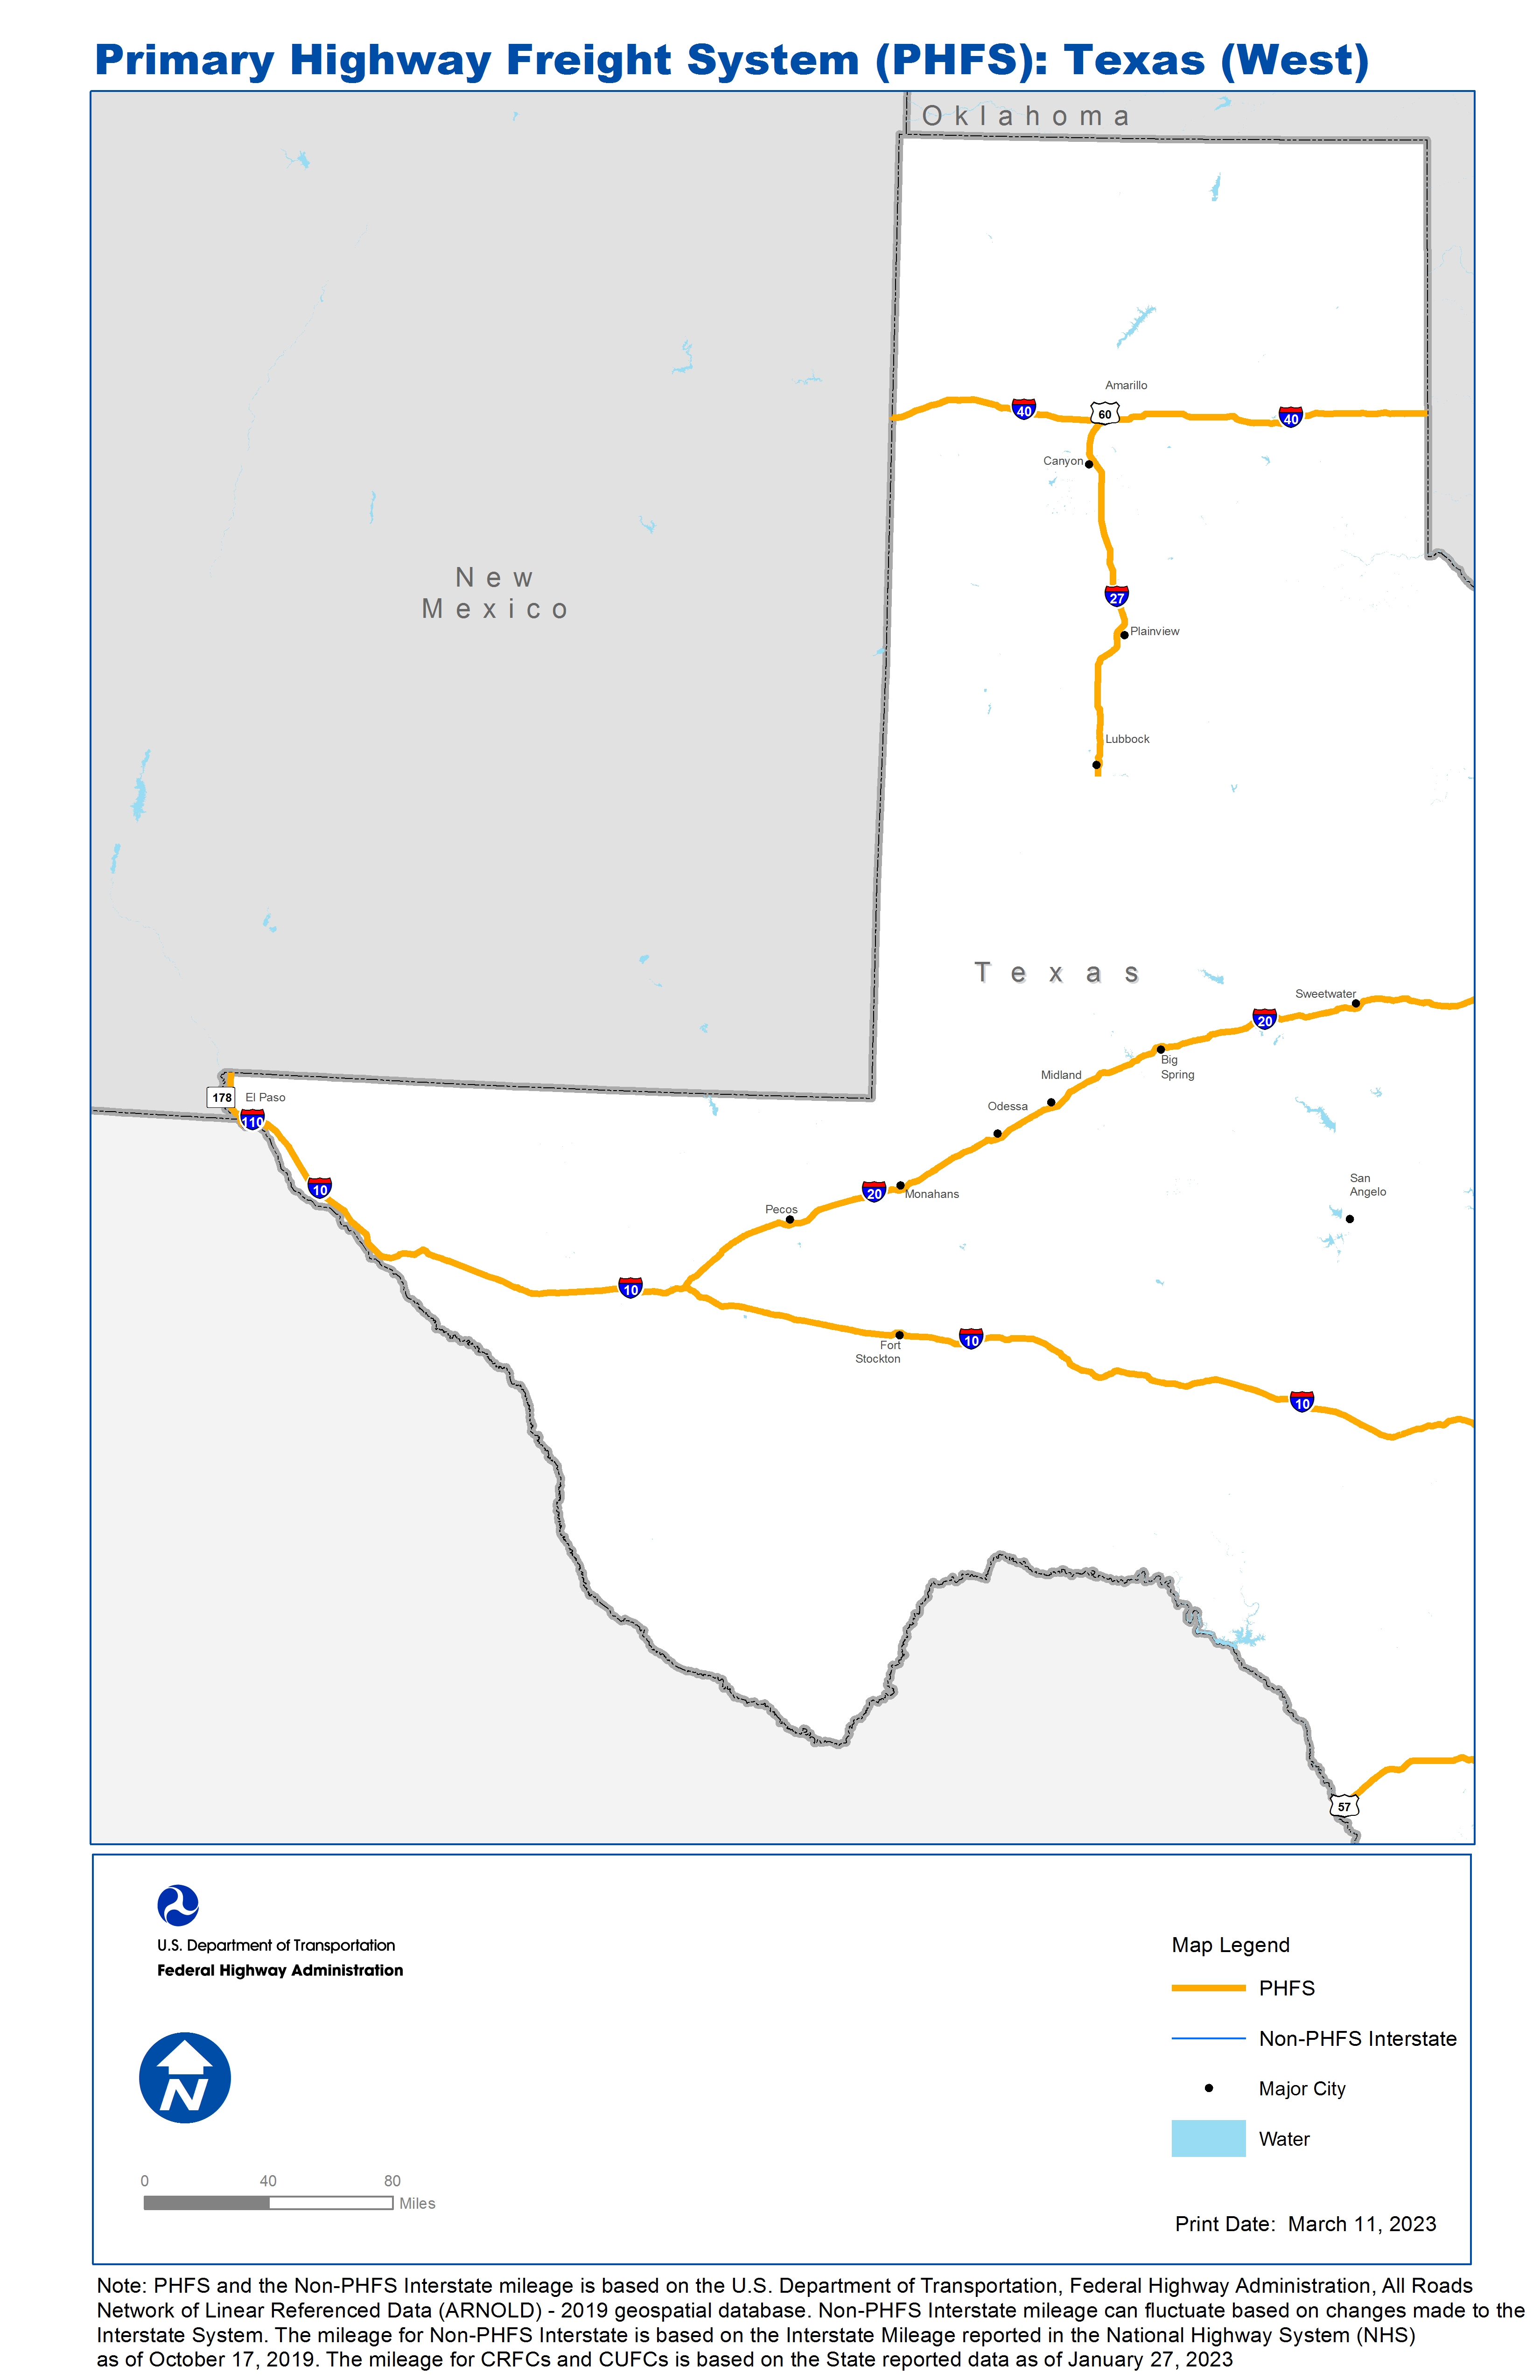 This map shows the Primary Highway Freight System (PHFS) routes of West Texas